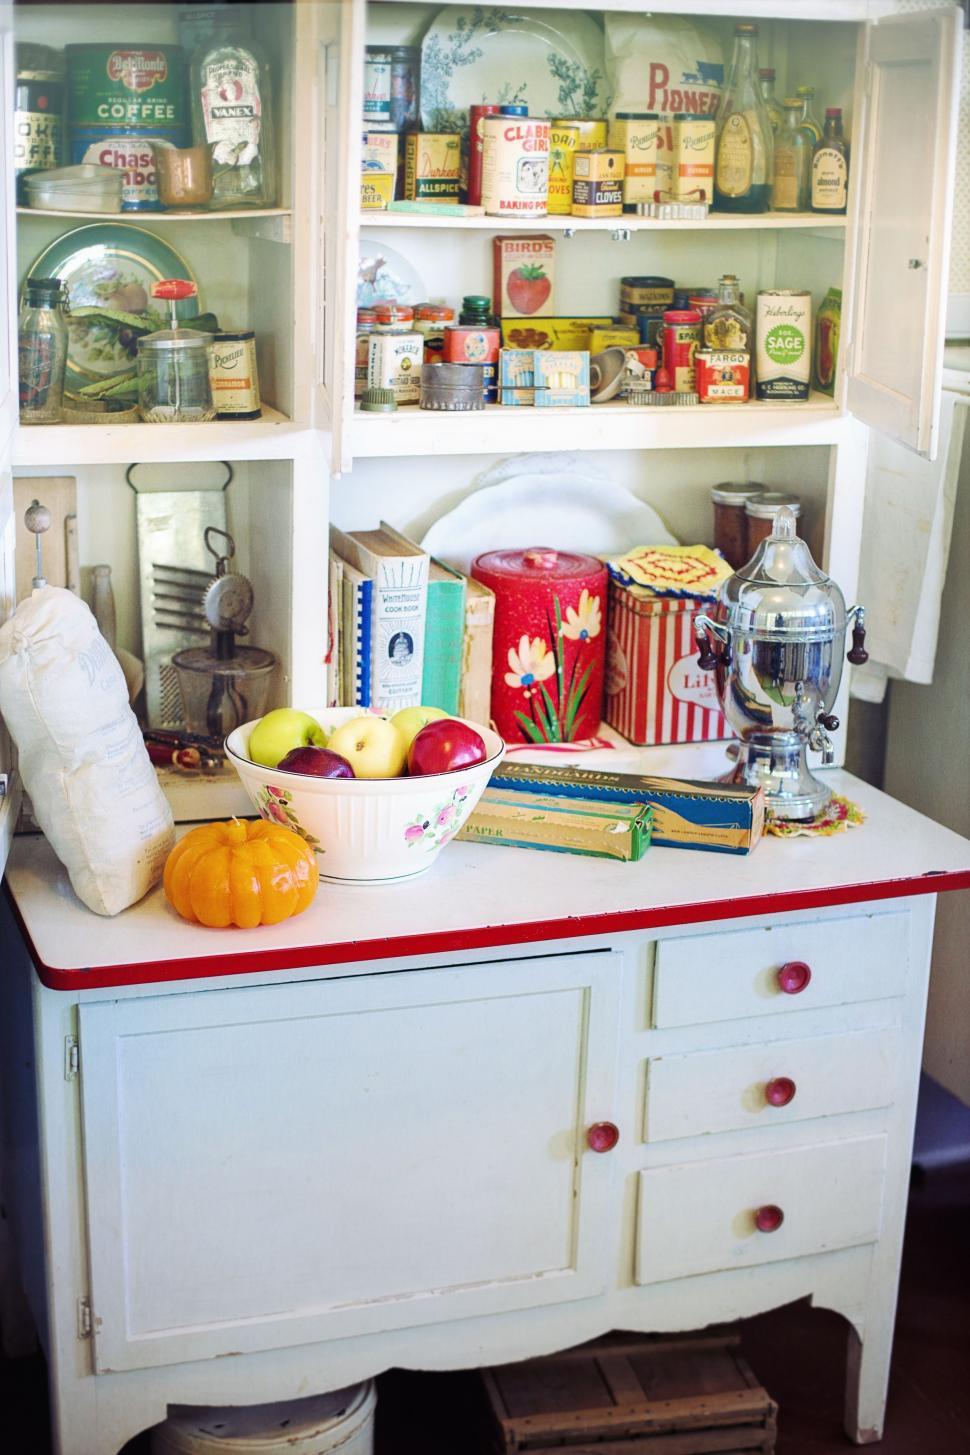 Free Image of Kitchen cupboard with cooking ingredients  